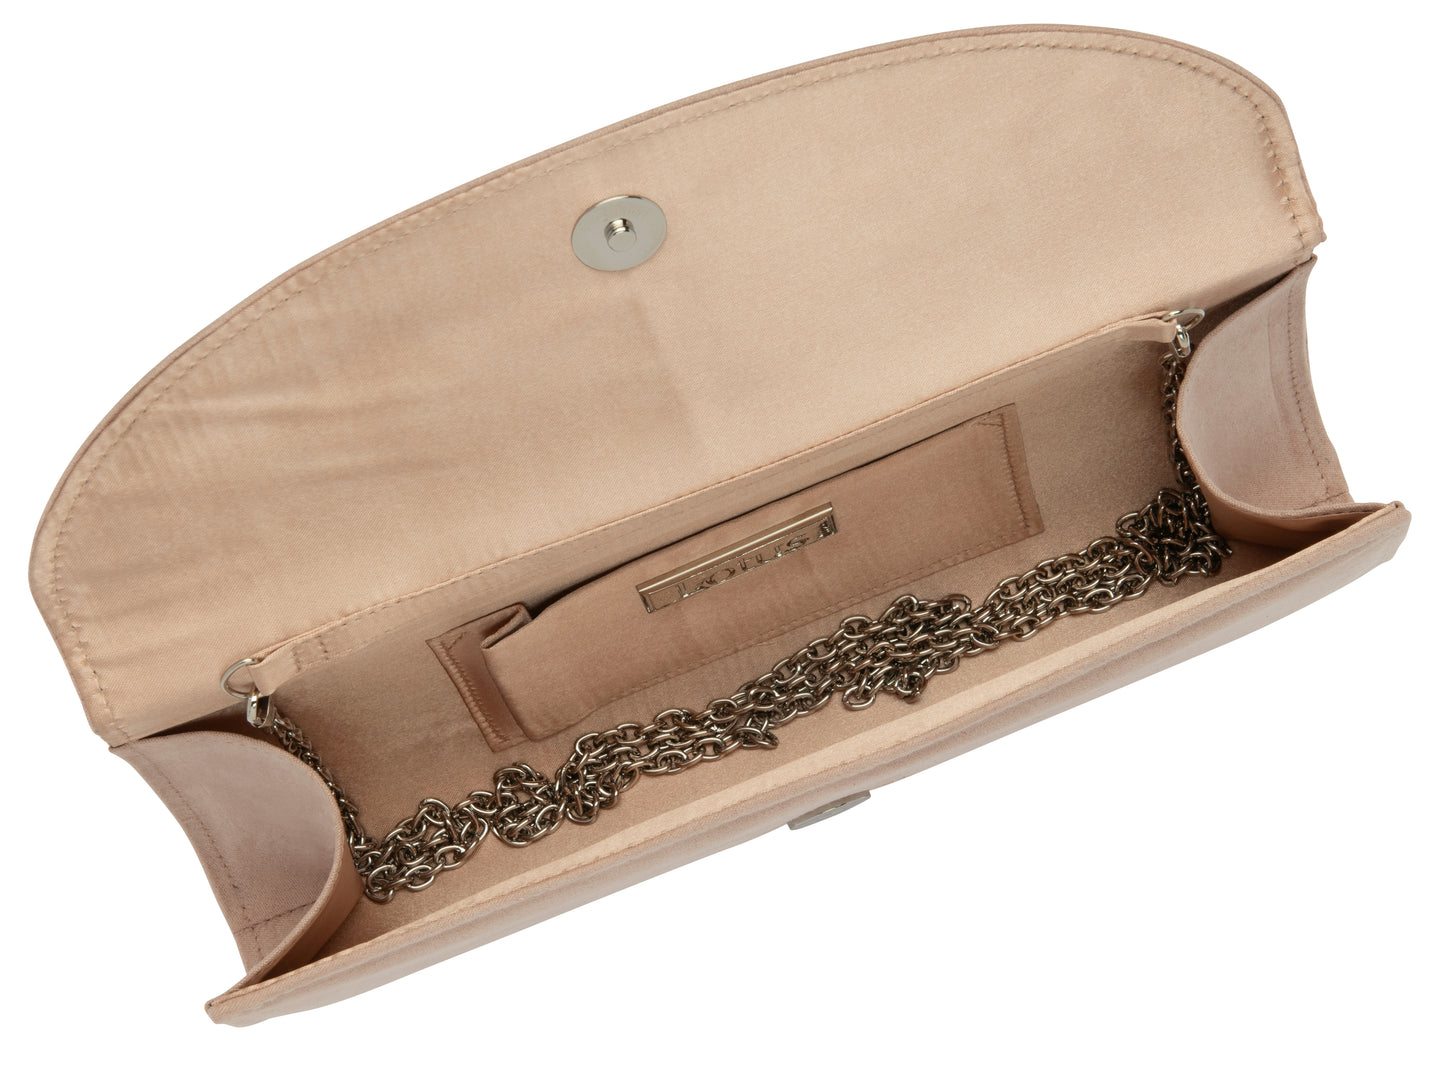 Lotus Claire Oyster Clutch Bag